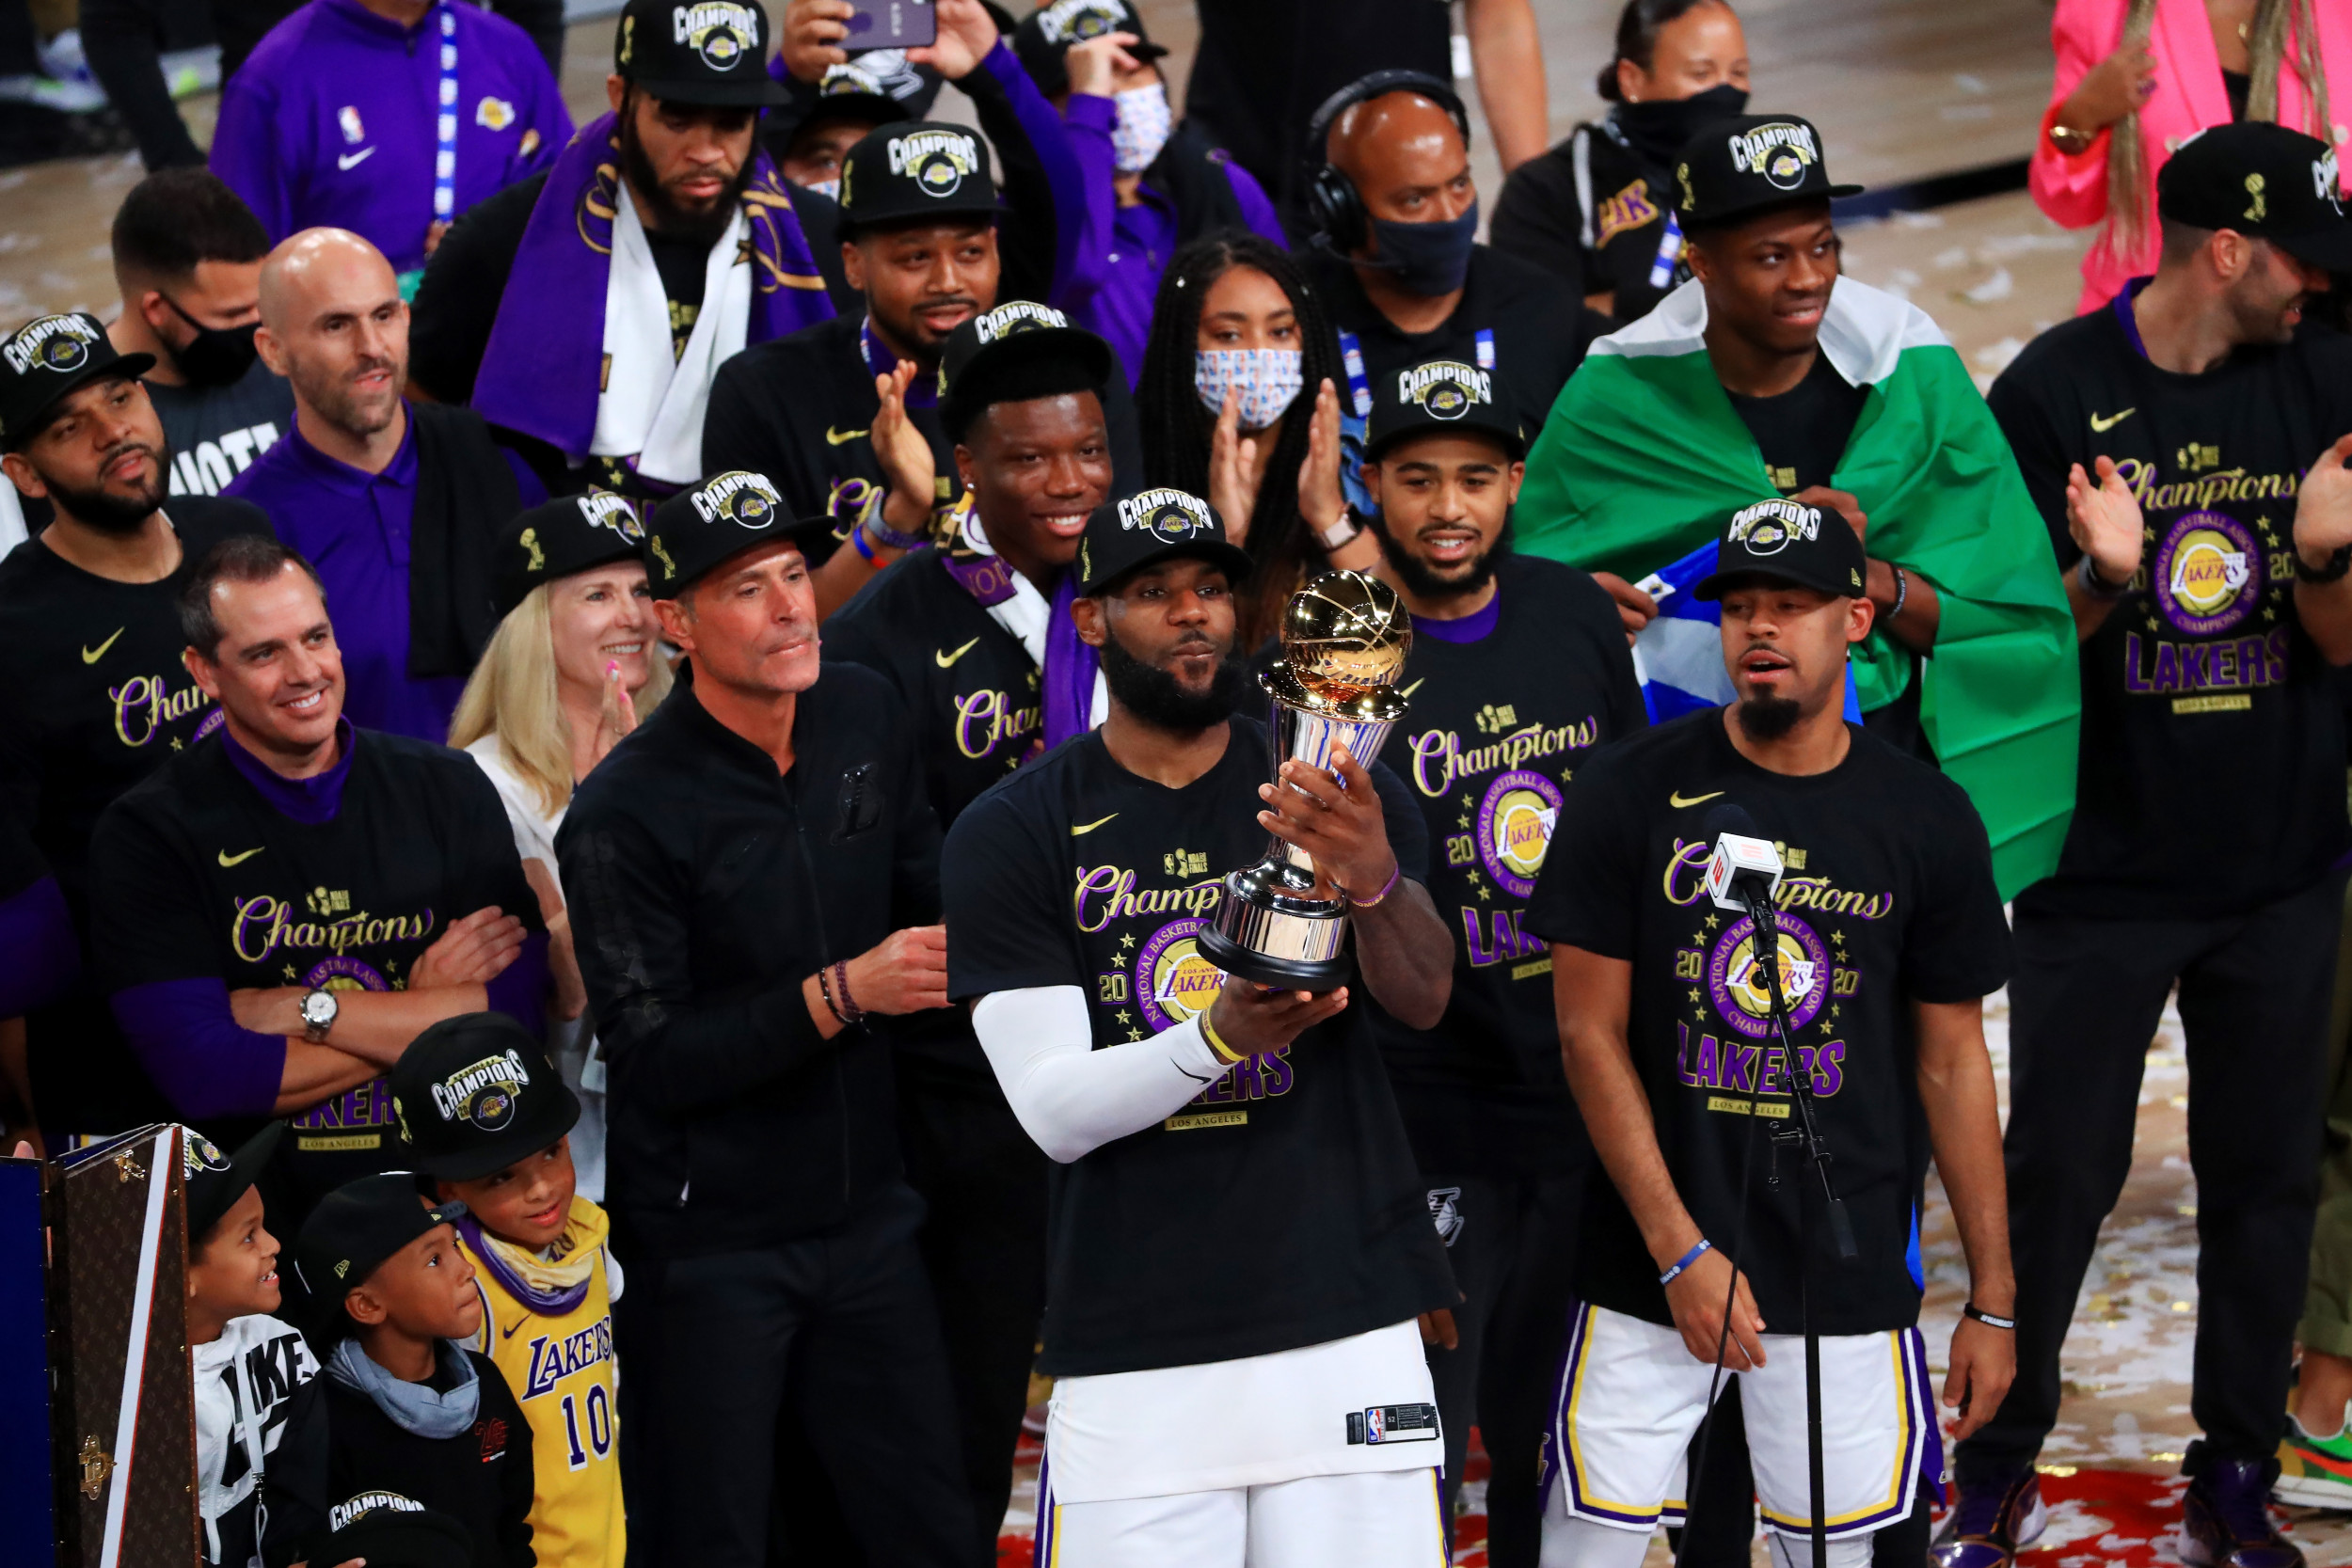 LeBron, Lakers to celebrate NBA title at White House after Trump is gone